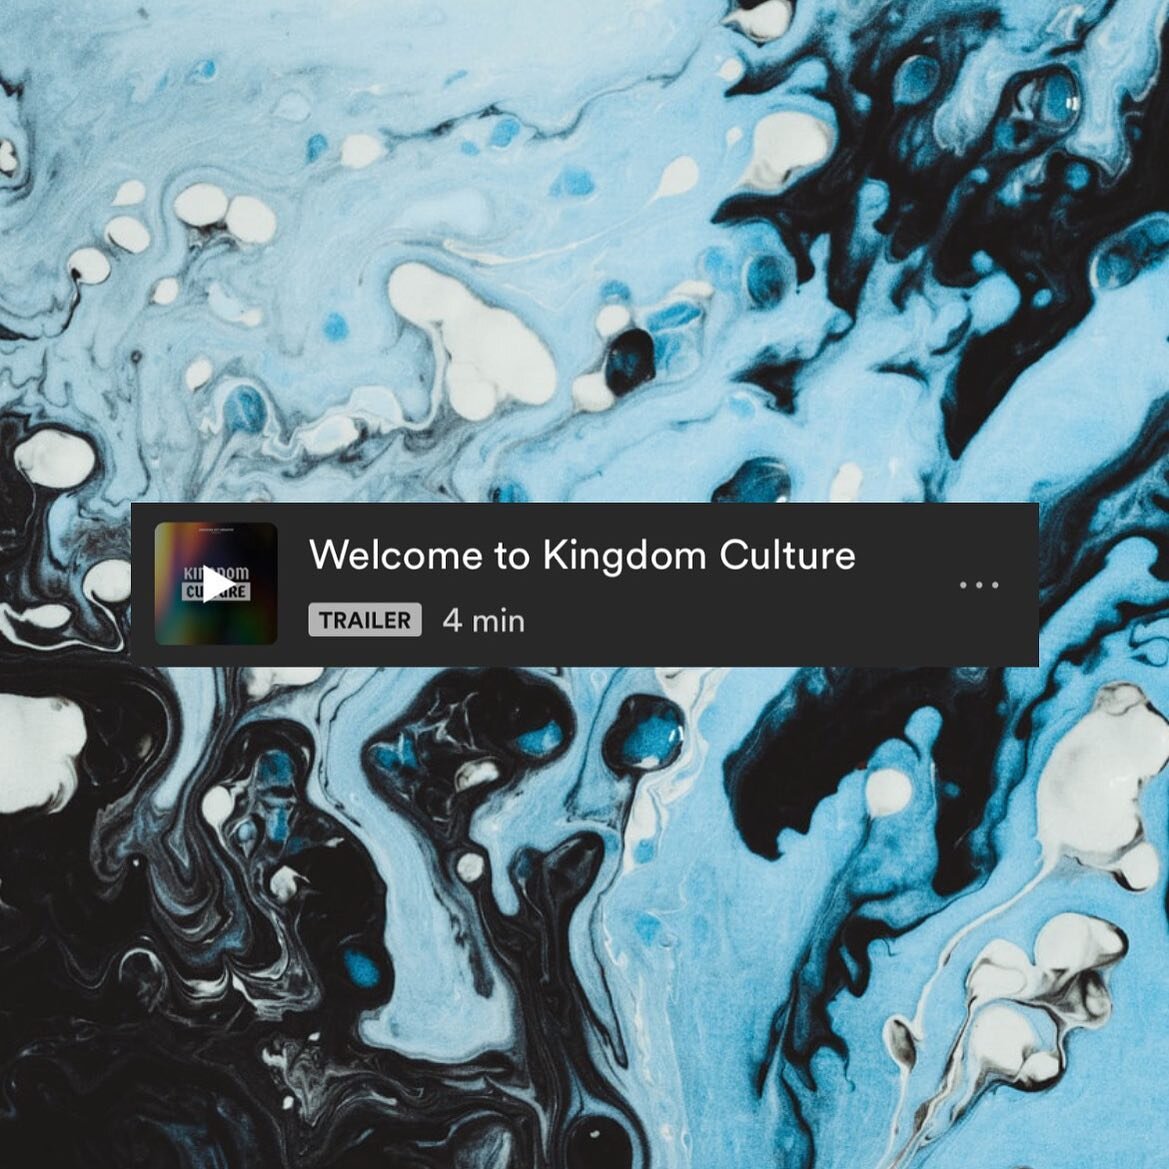 The trailer is here! Head to Spotify to listen and get a sneak peak into season one!

#KingdomCulturePodcast